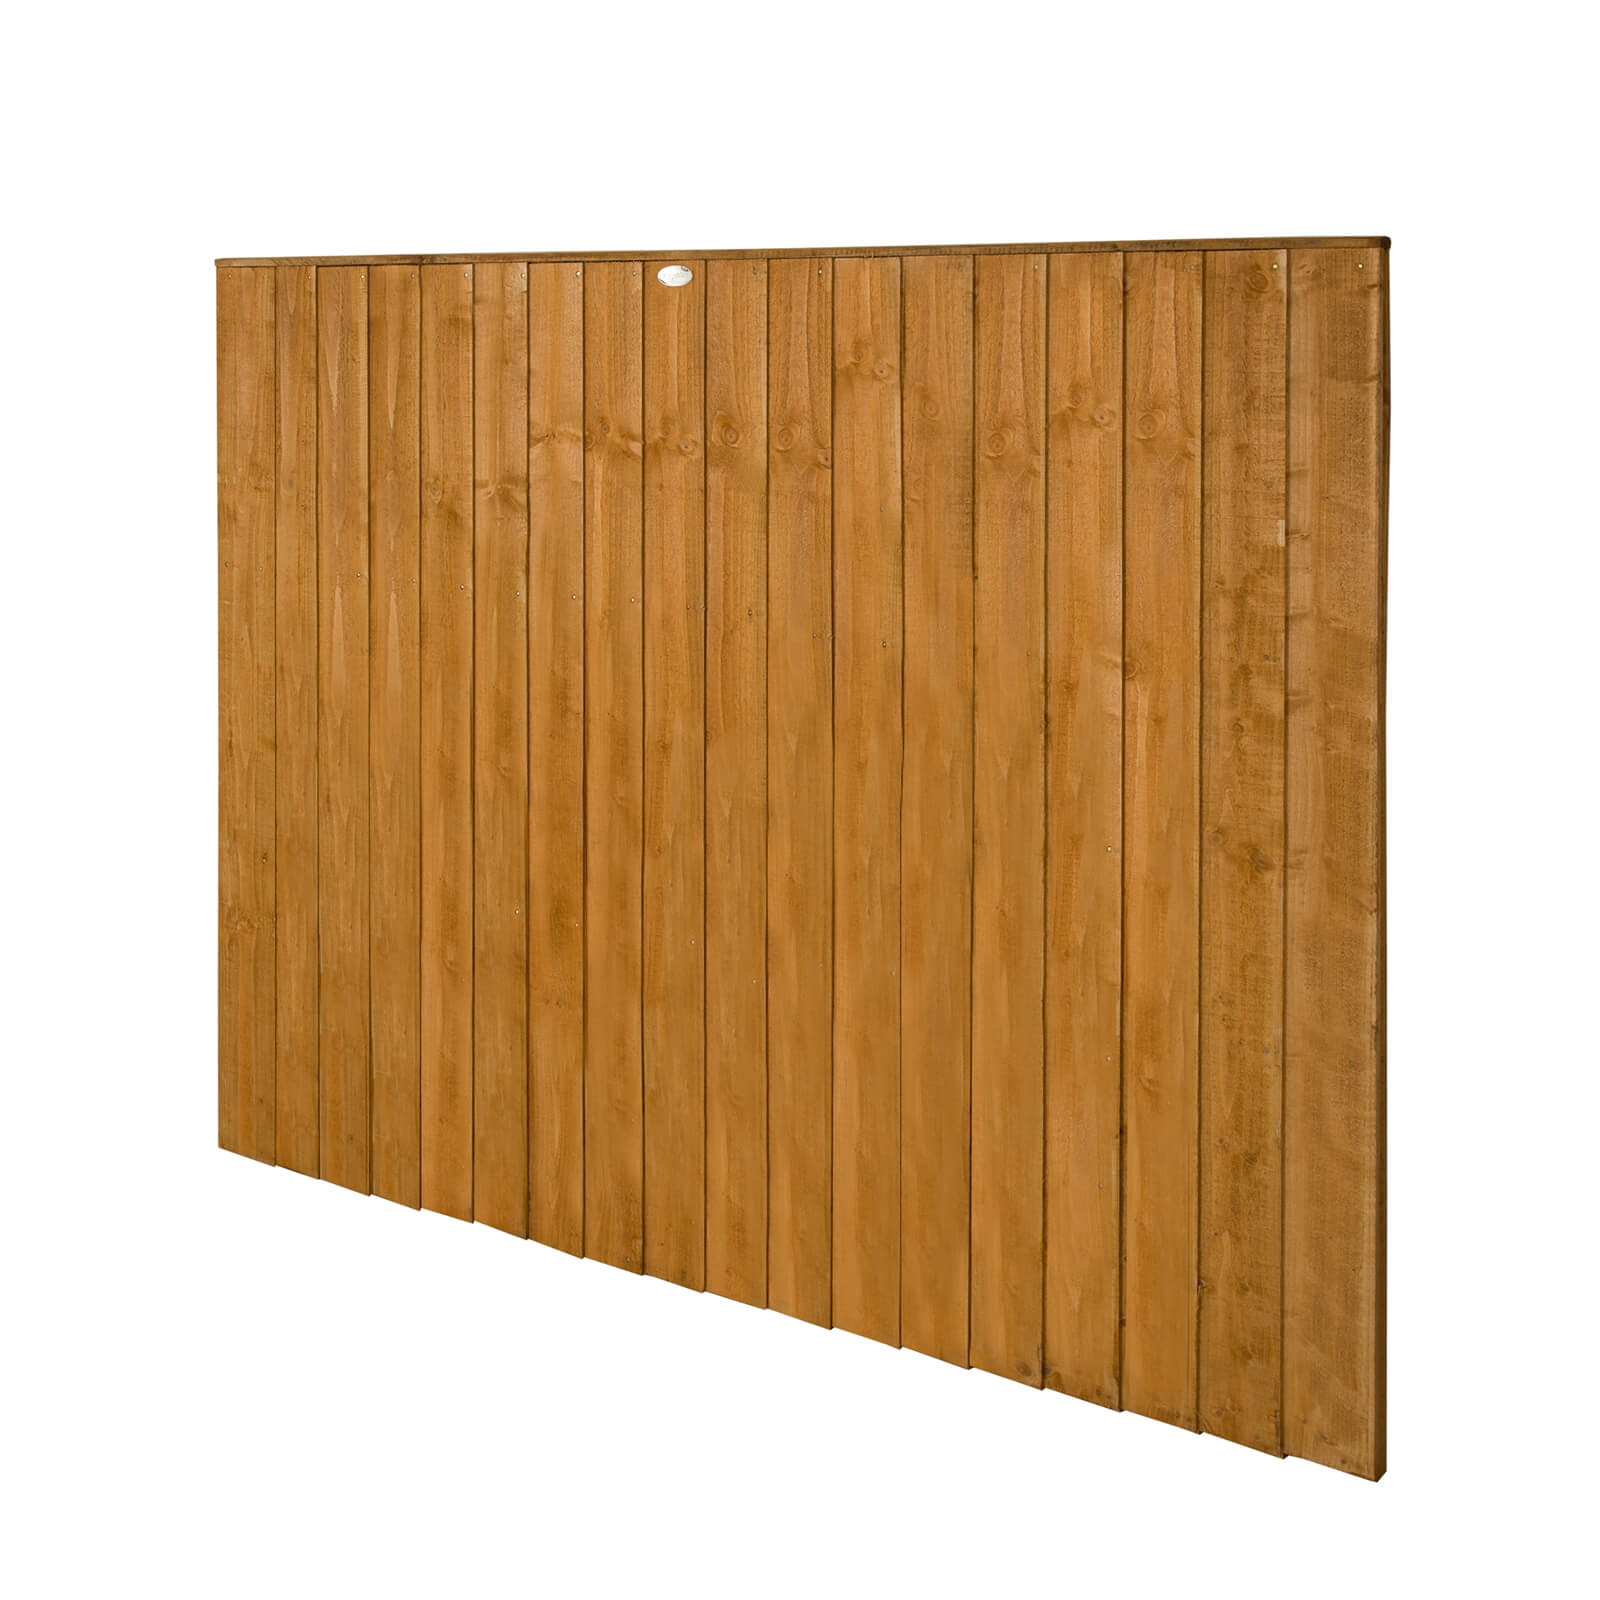 Forest Featherdge Dip Treated Fence Panel - 5ft - Pack of 3